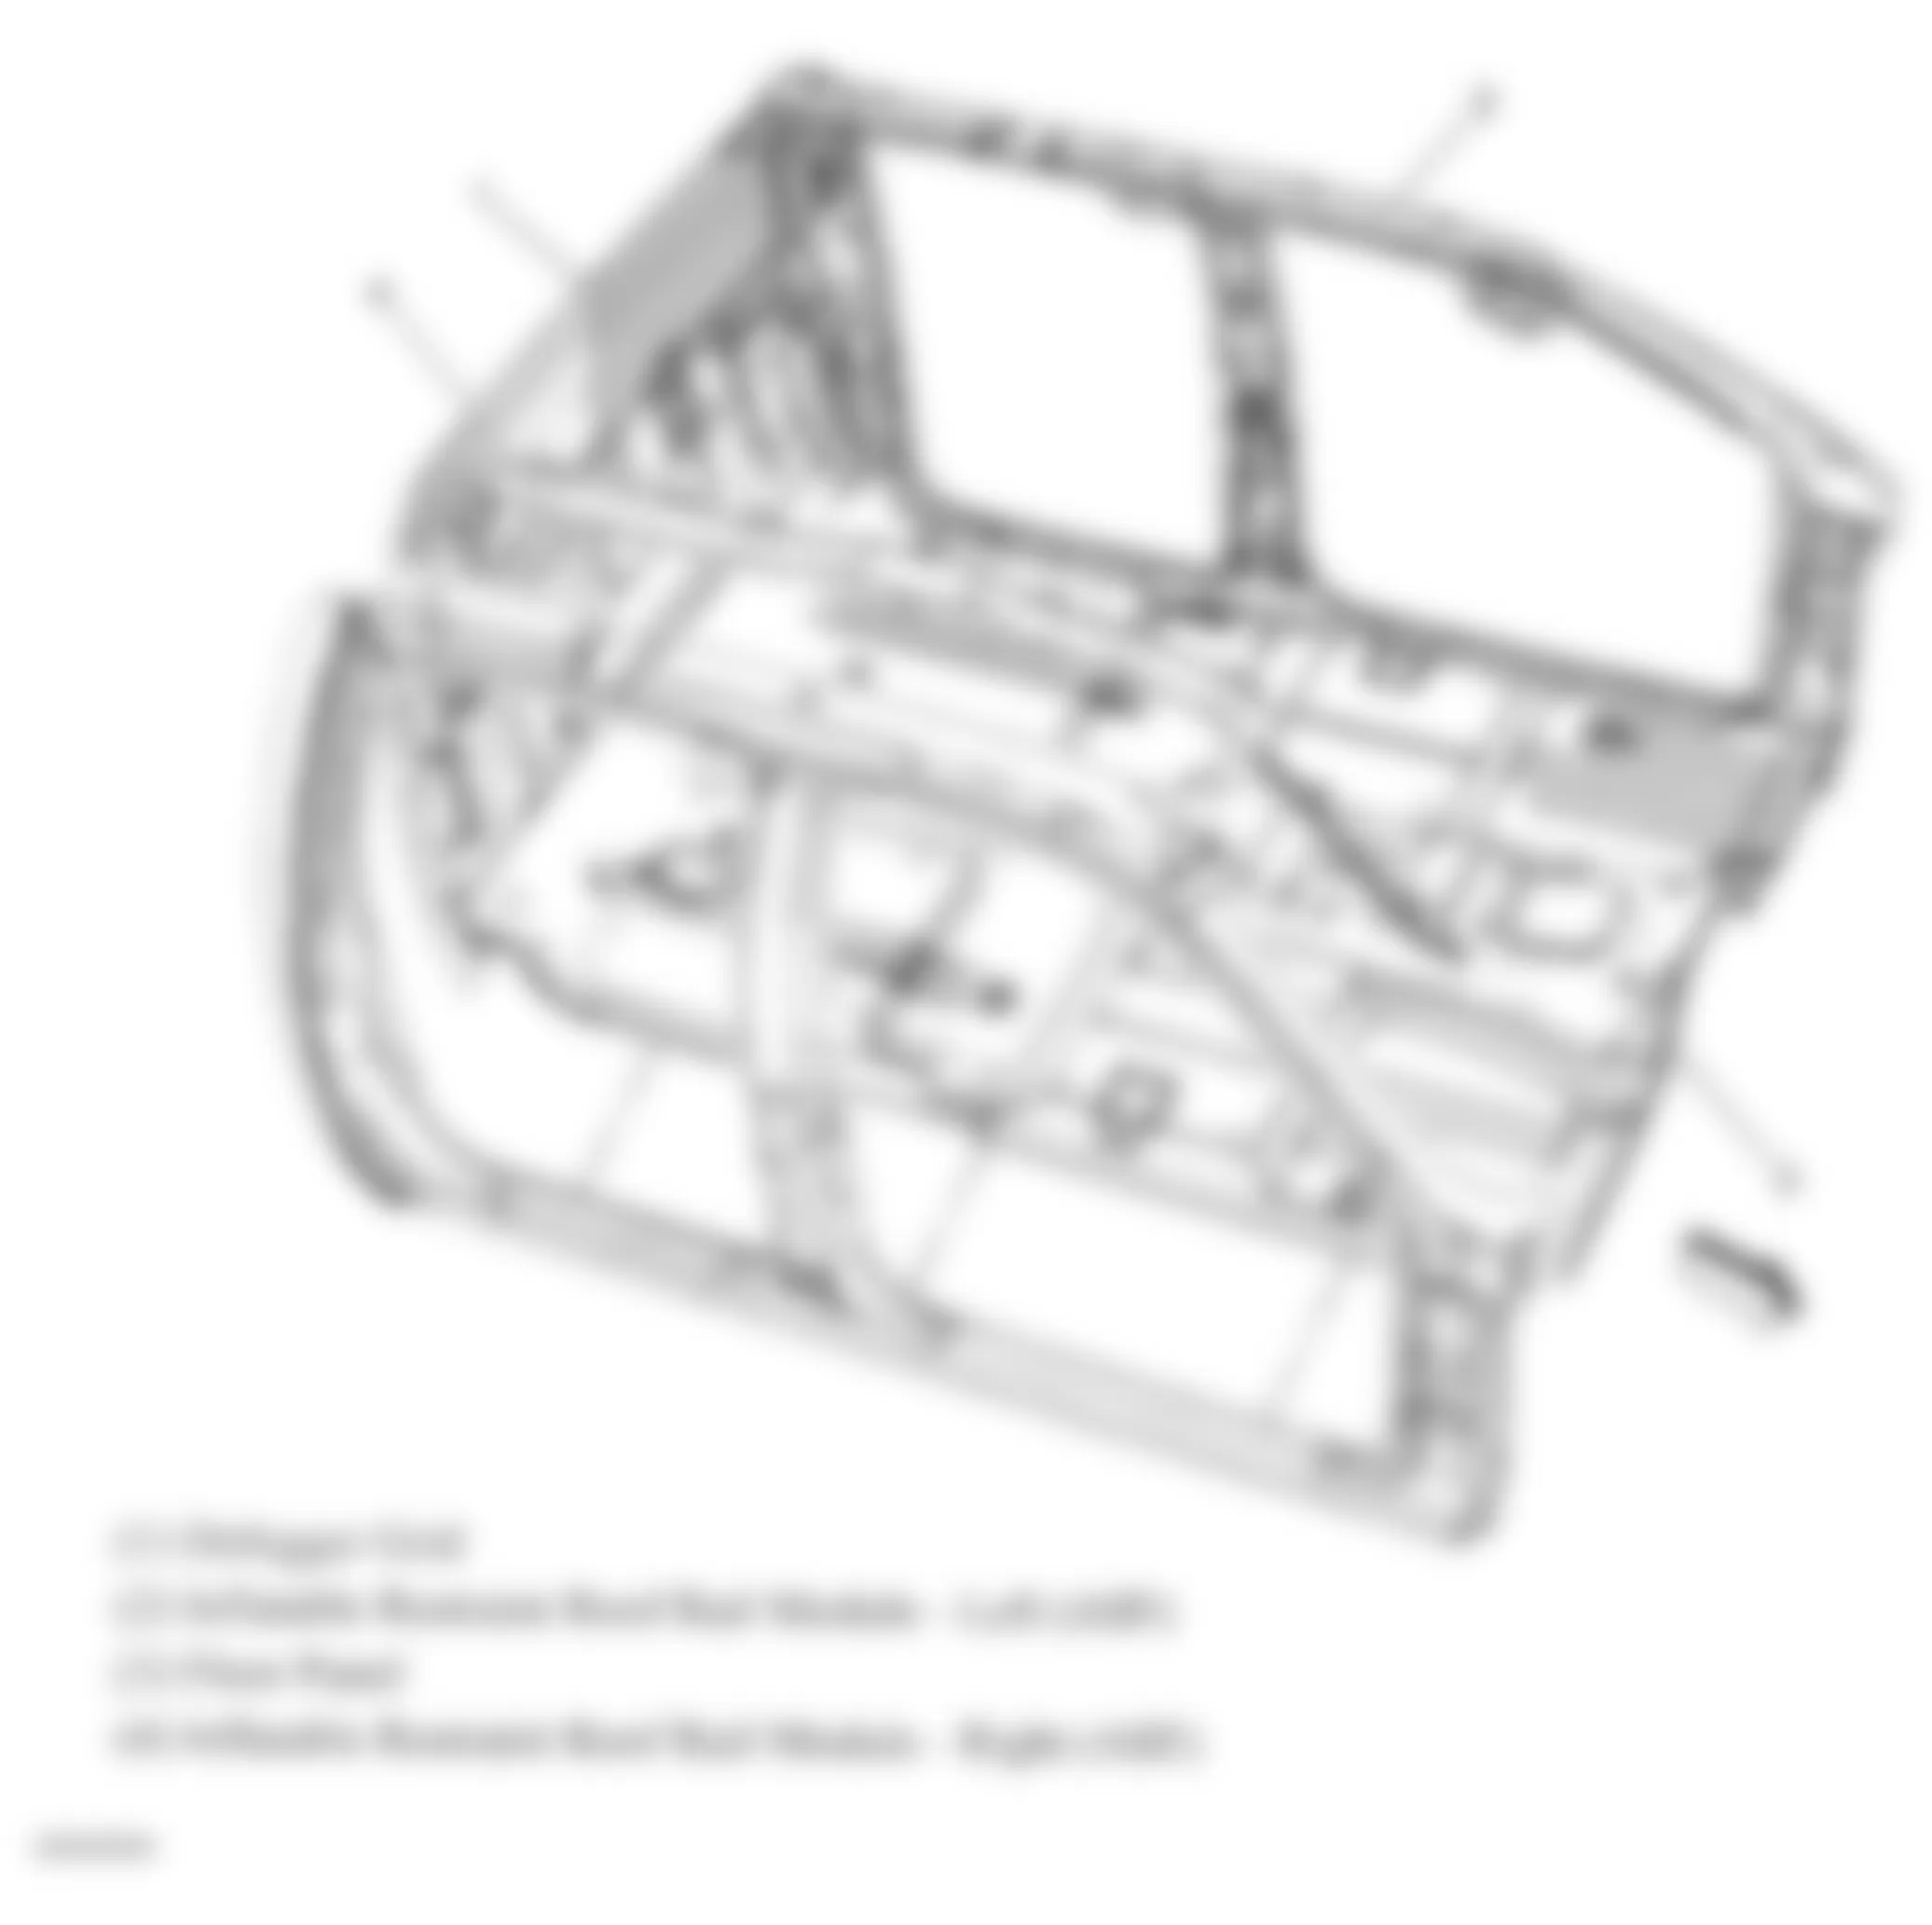 GMC Sierra 3500 HD 2009 - Component Locations -  Roof Rail Air Bags (Extended Cab & Crew Cab)